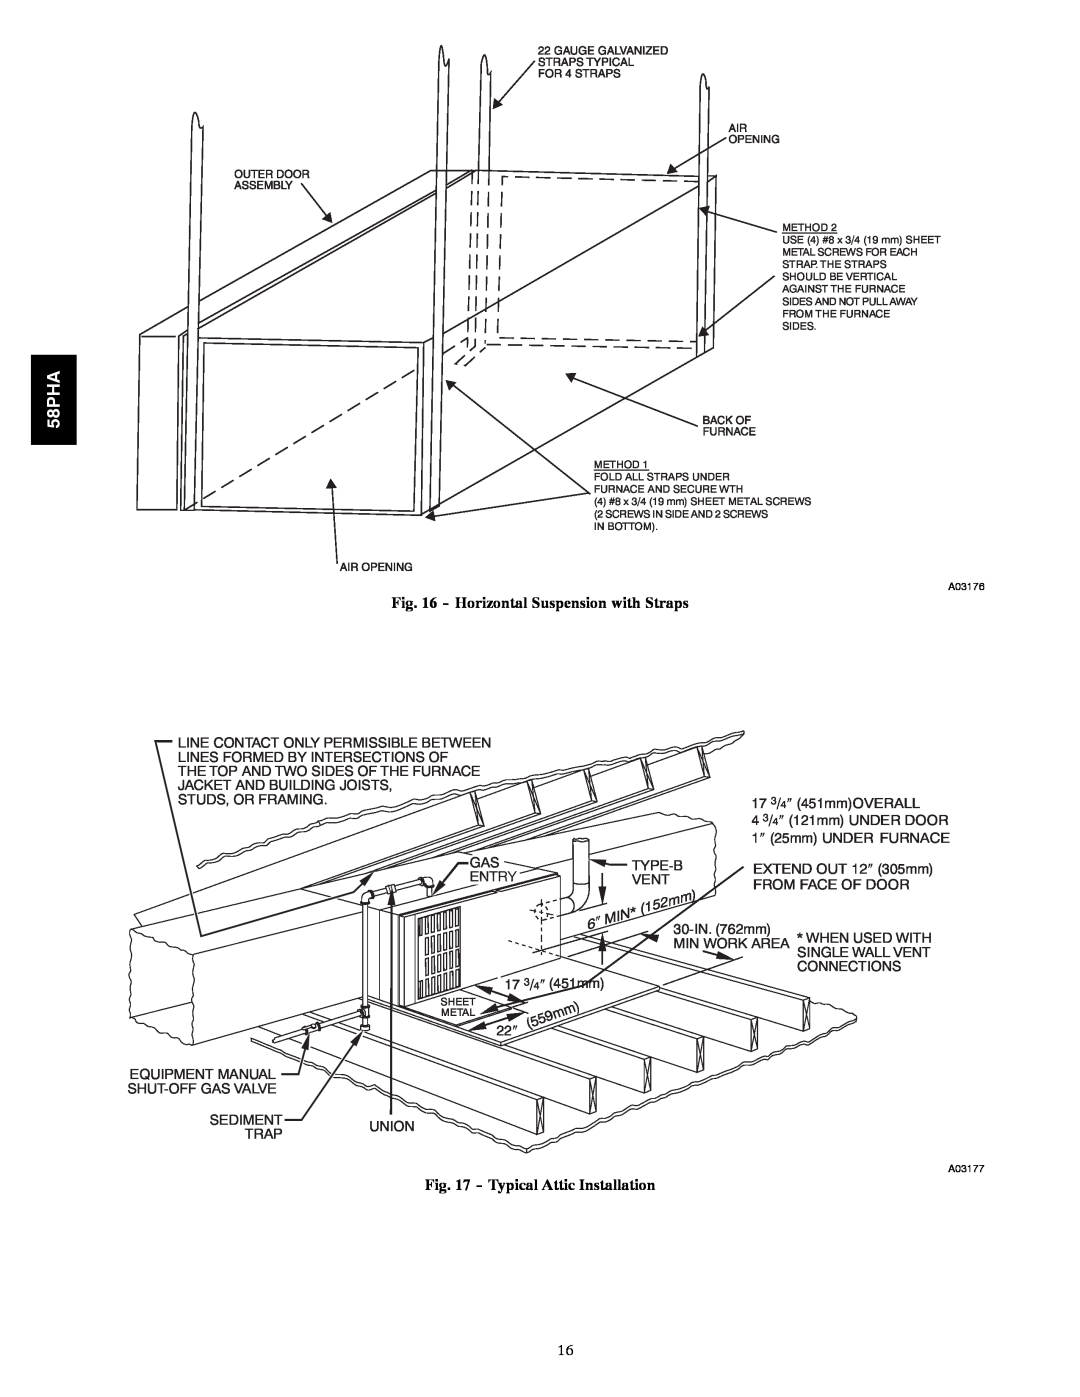 Carrier 58PHA/PHX instruction manual Horizontal Suspension with Straps, Typical Attic Installation 